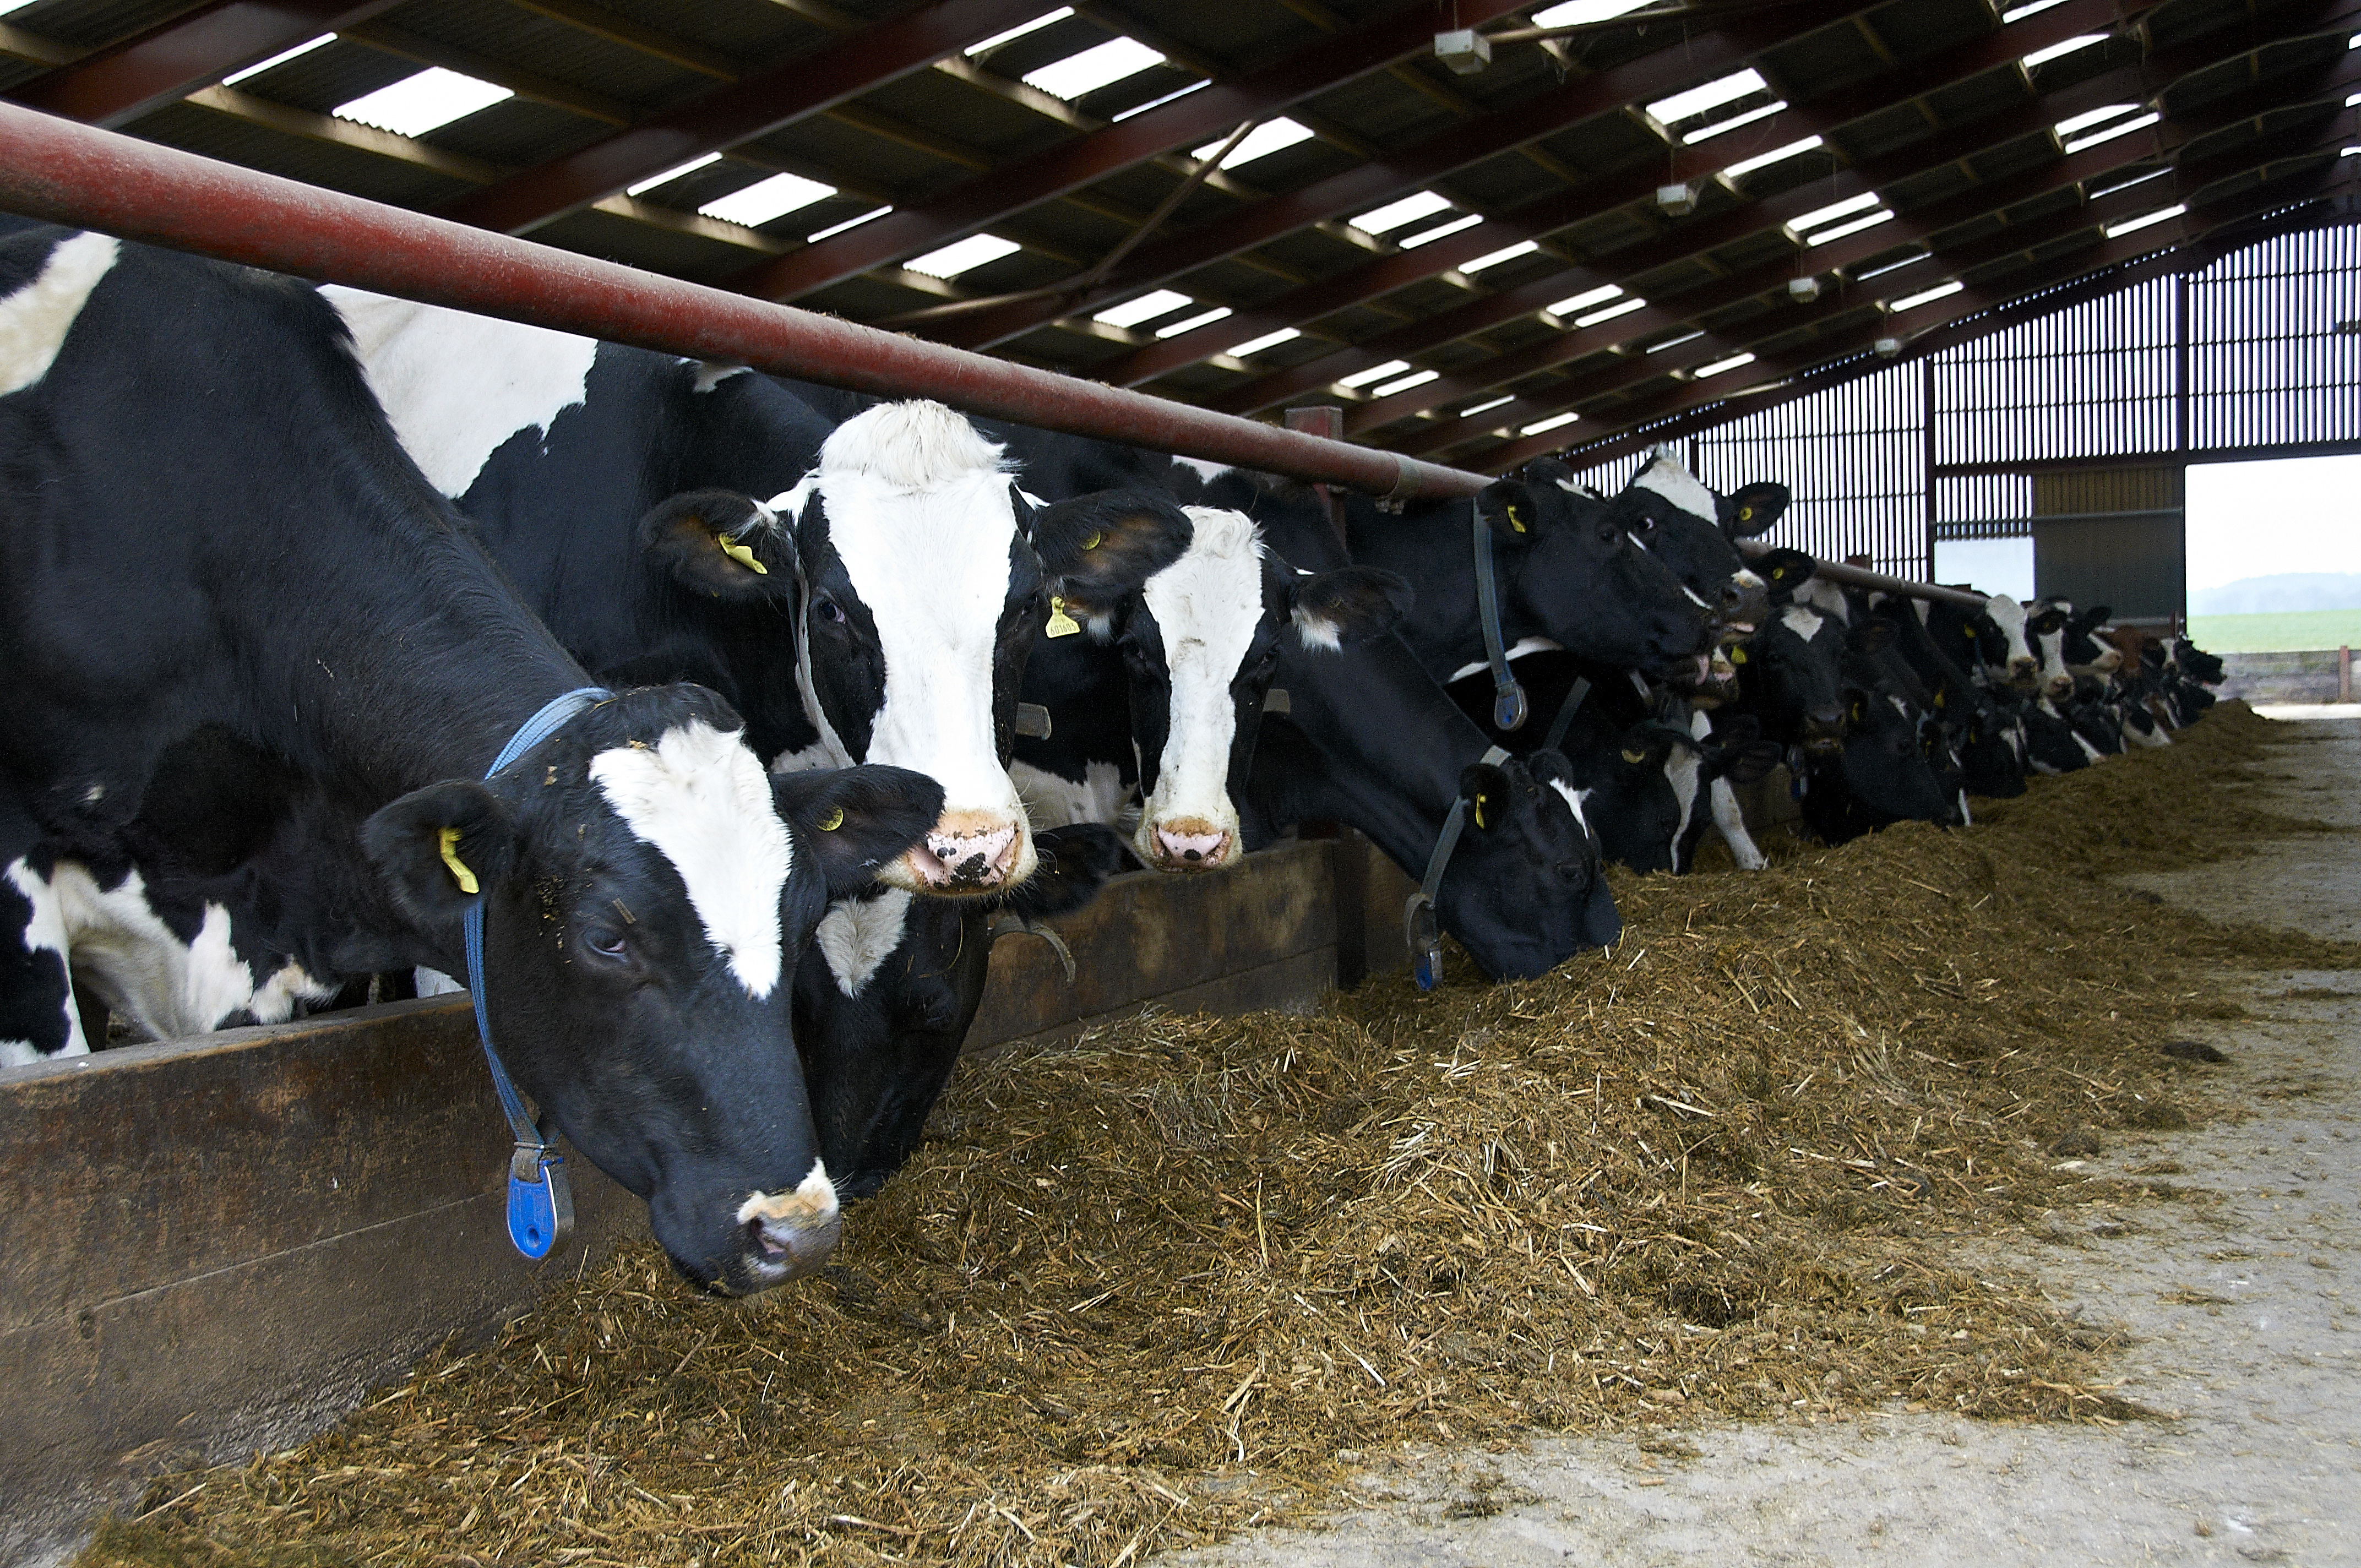 cows eating silage